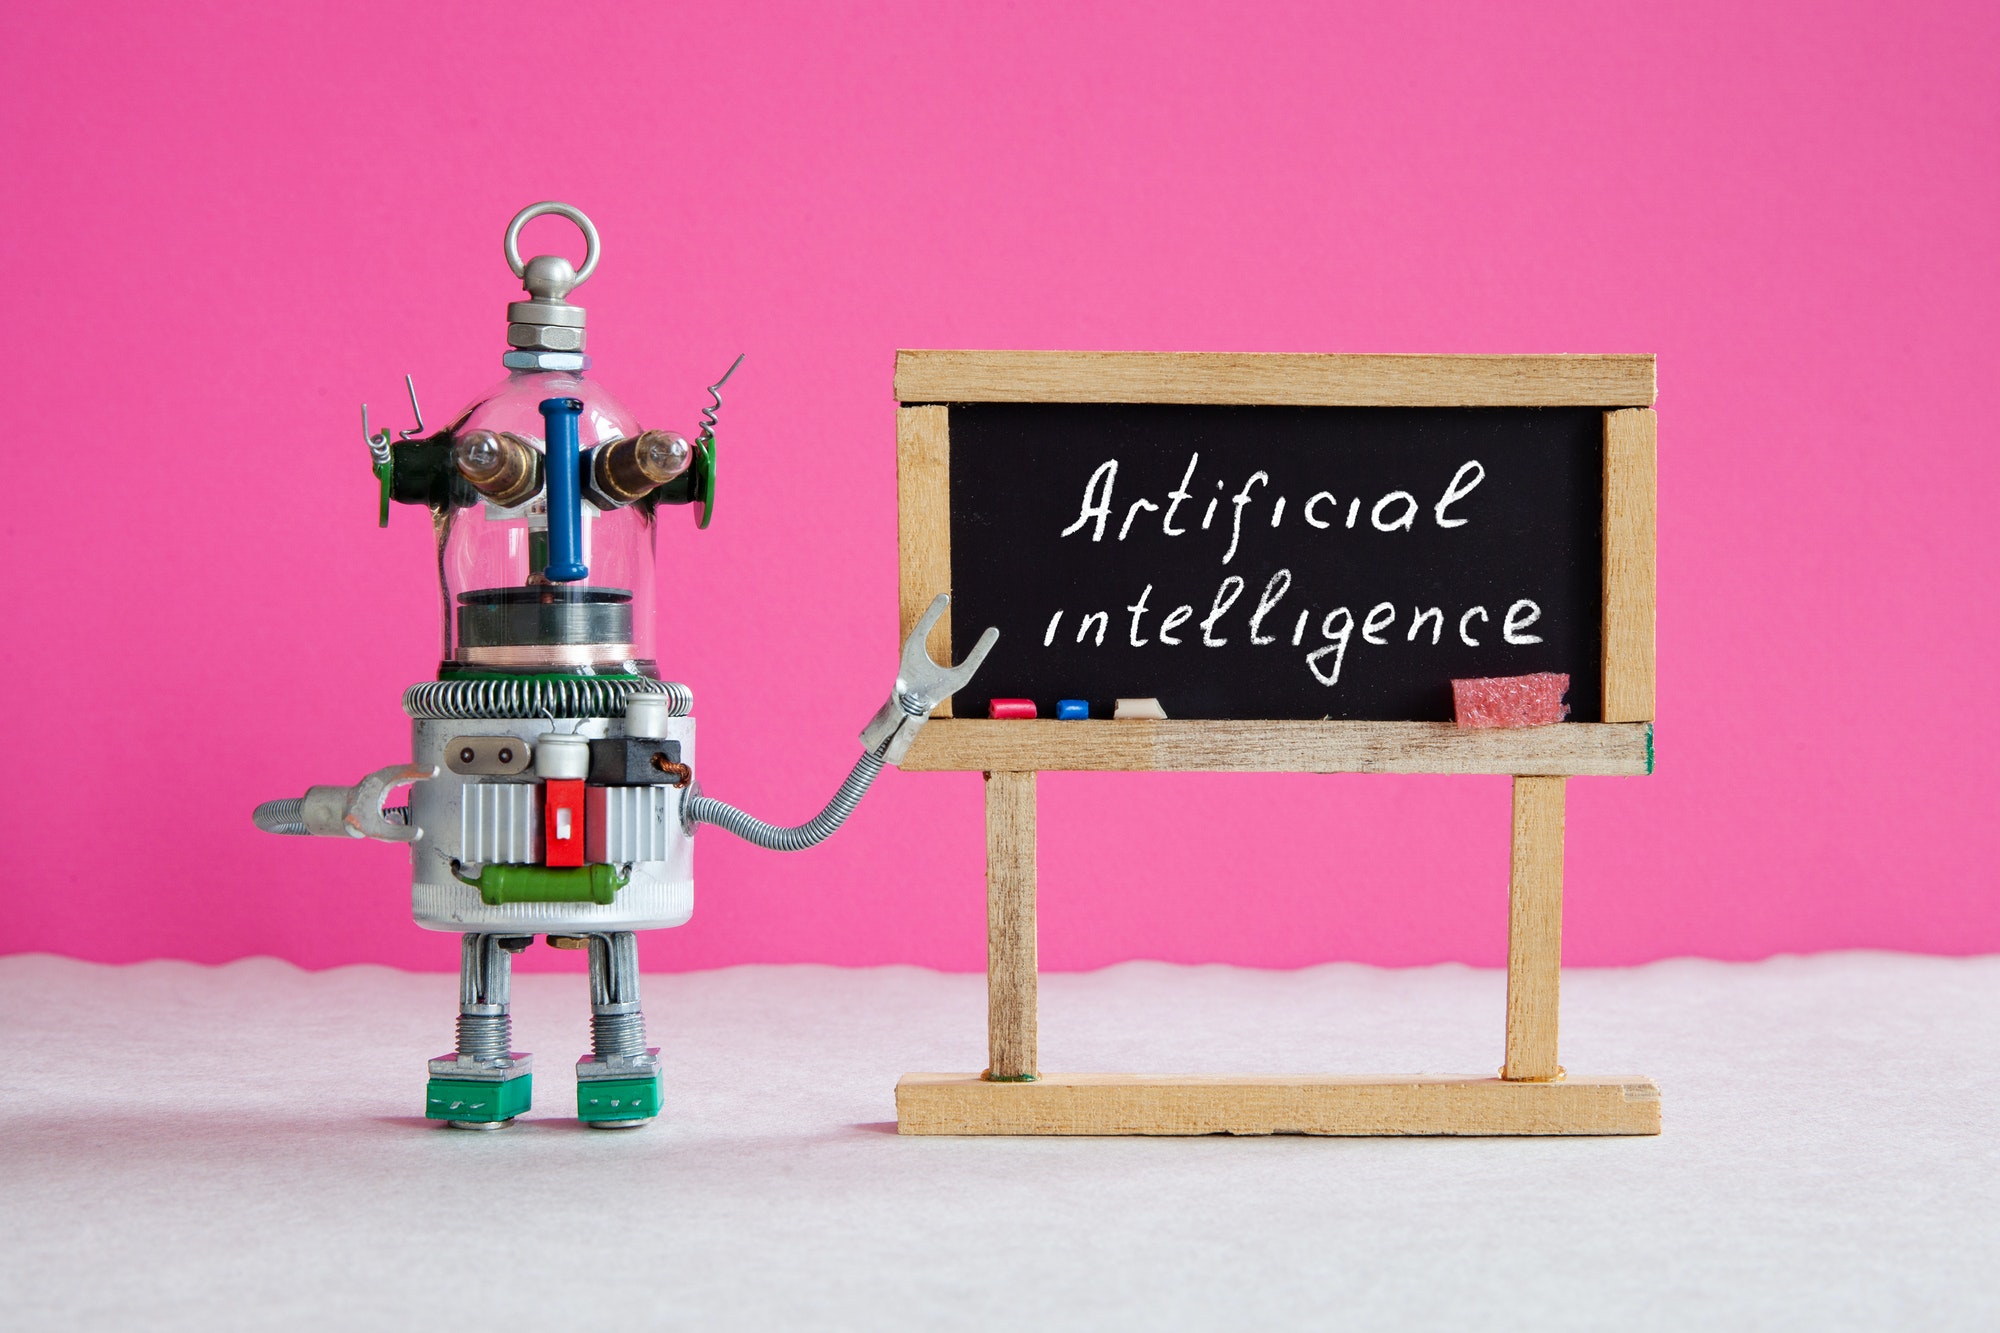 Artificial intelligence and machine learning concept.